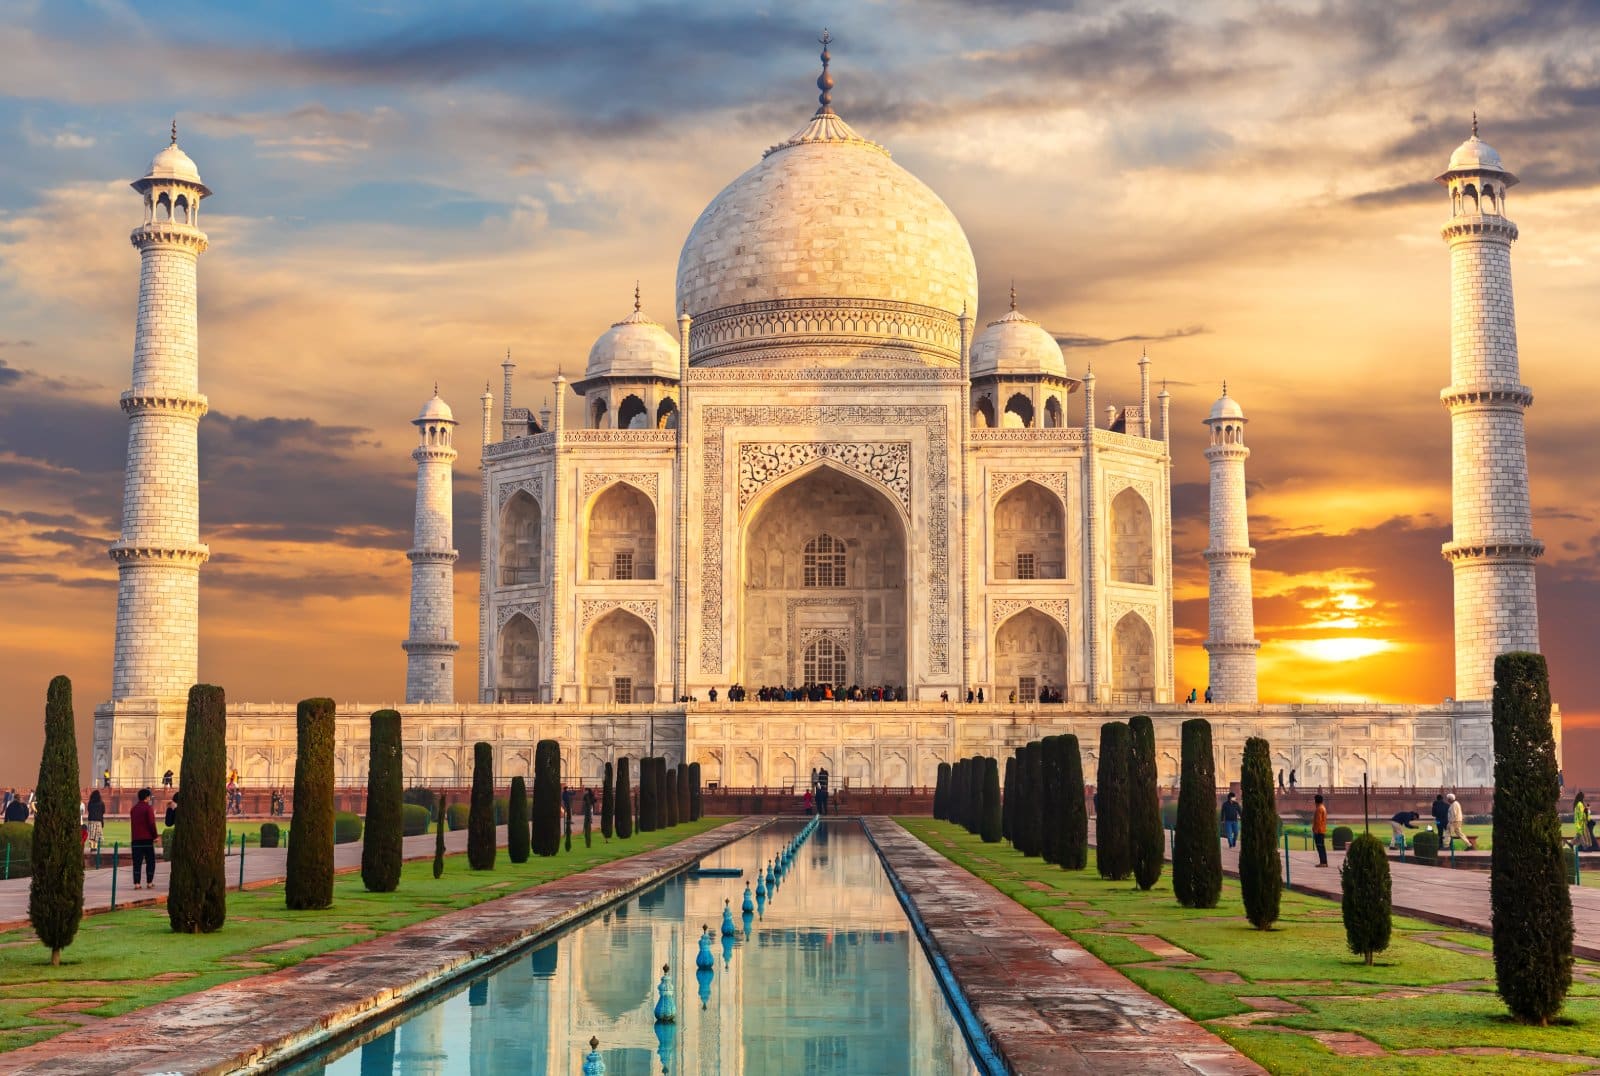 <p class="wp-caption-text">Image Credit: Shutterstock / AlexAnton</p>  <p><span>India’s UNESCO World Heritage Sites are as diverse as its cultural tapestry, featuring everything from the architectural splendor of the Taj Mahal and the ancient ruins of the Ellora Caves to the natural wonders of the Western Ghats. These sites not only reflect the rich historical narratives and cultural philosophies of the Indian subcontinent but also its commitment to preserving its unique biodiversity. Visitors can immerse themselves in India’s spiritual heritage in Varanasi, explore the Mughal gardens of Kashmir, or track tigers in the Sundarbans National Park.</span></p>